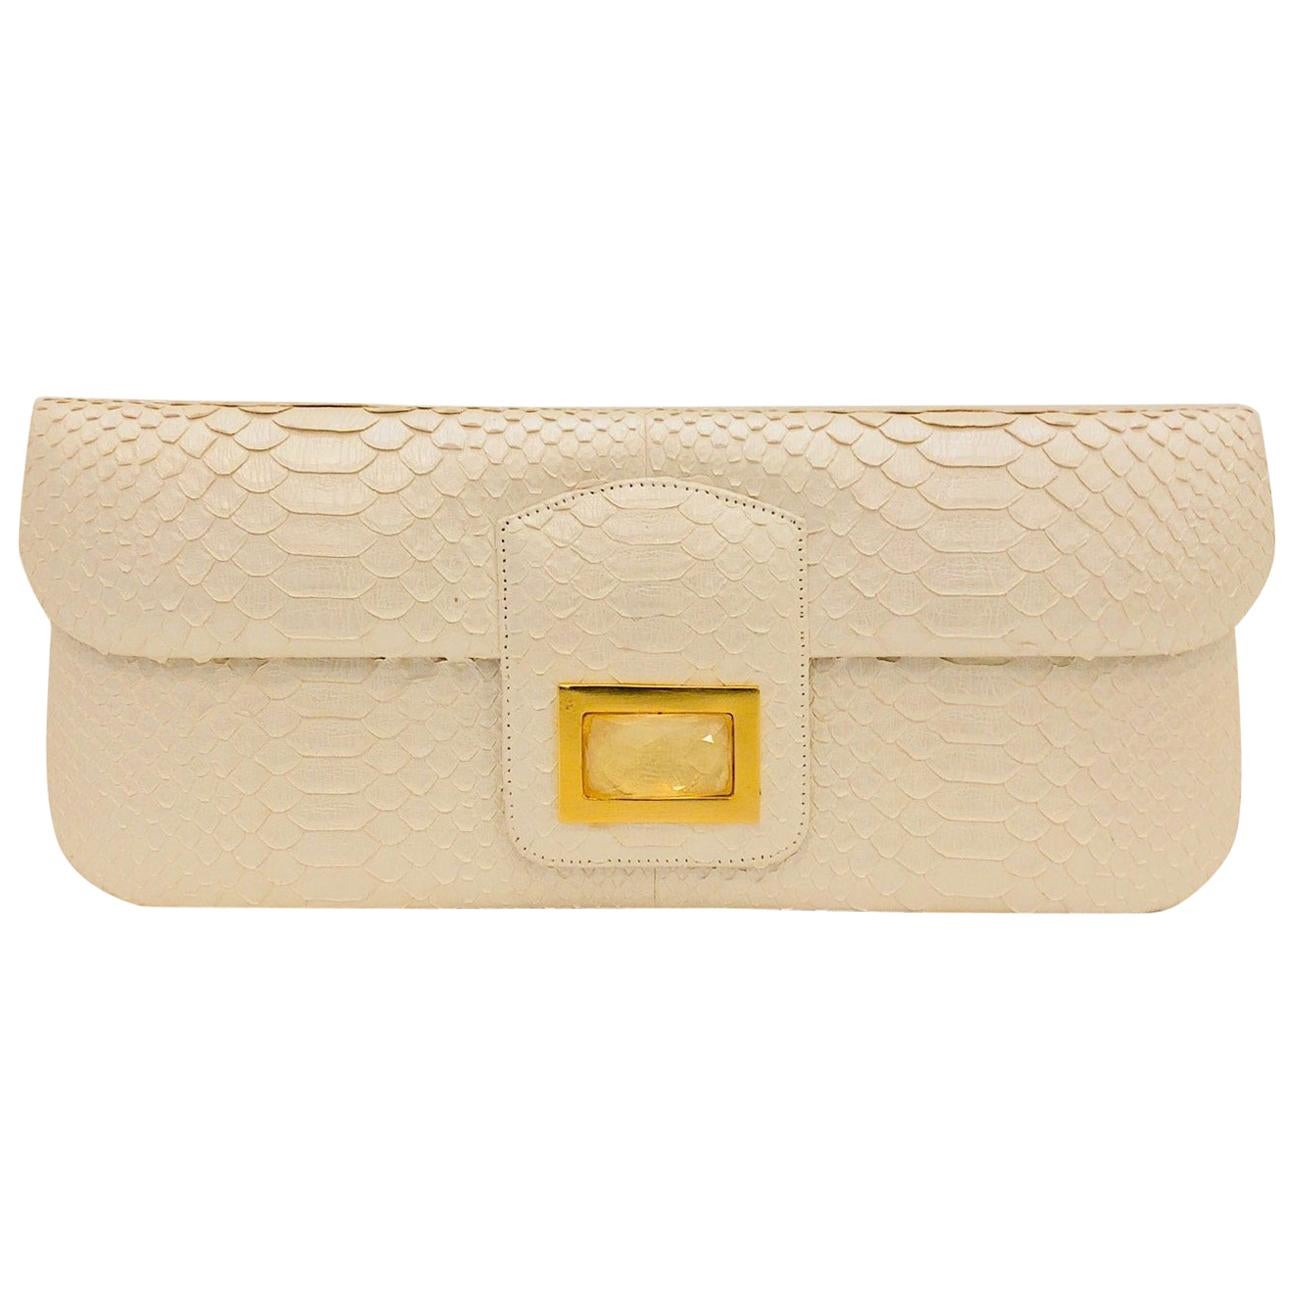 Kara Ross Collectible Ivory Python Clutch With Rock Crystal Embellishment 